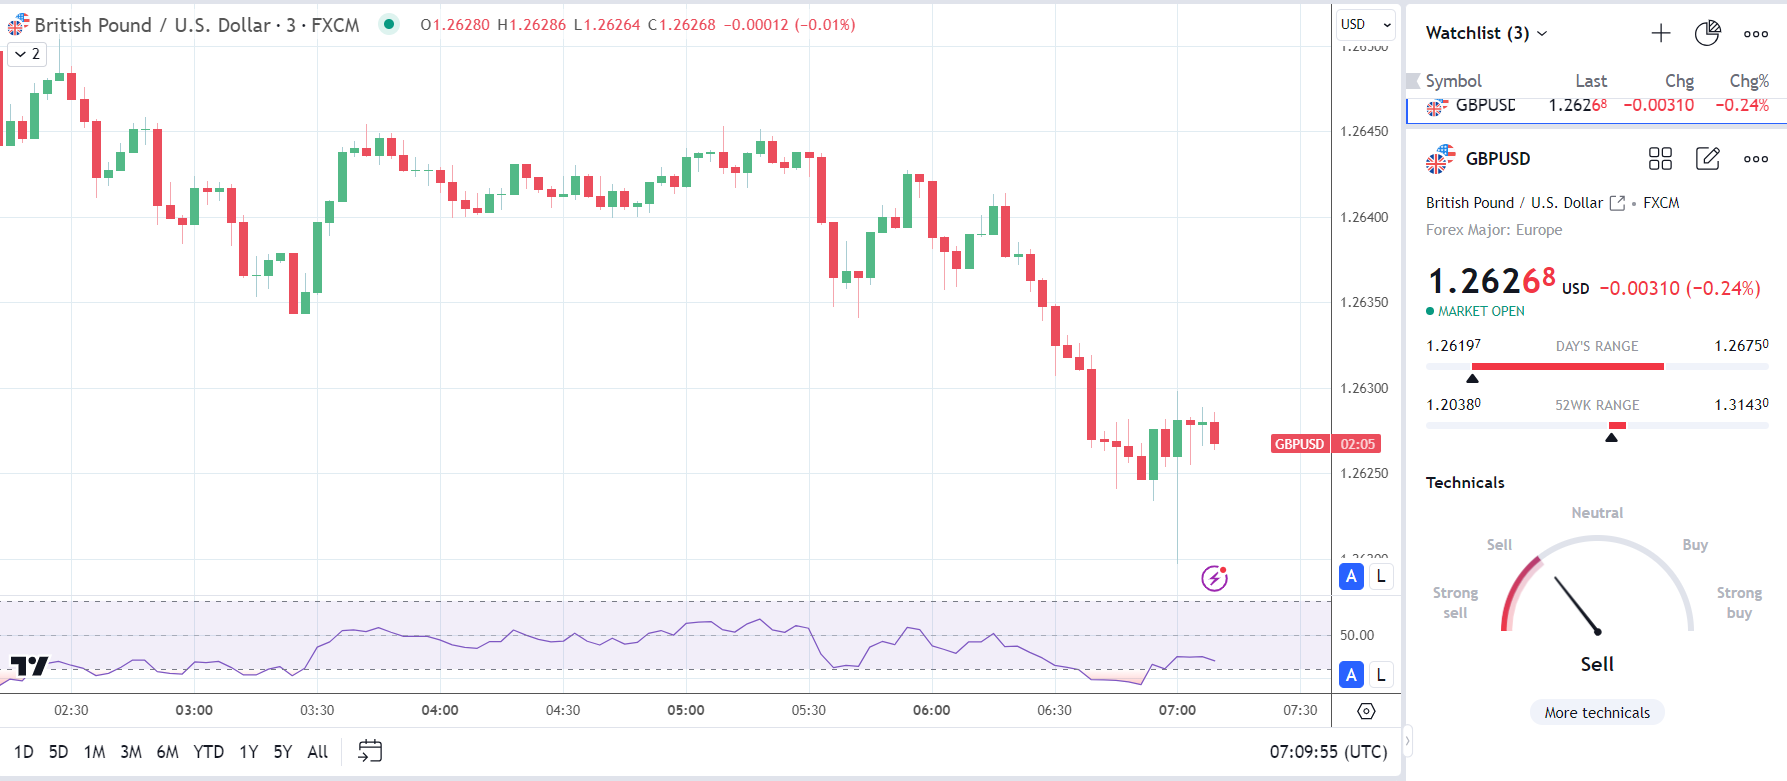 GBP/USD shows mixed reaction to UK Retail Sales Report.